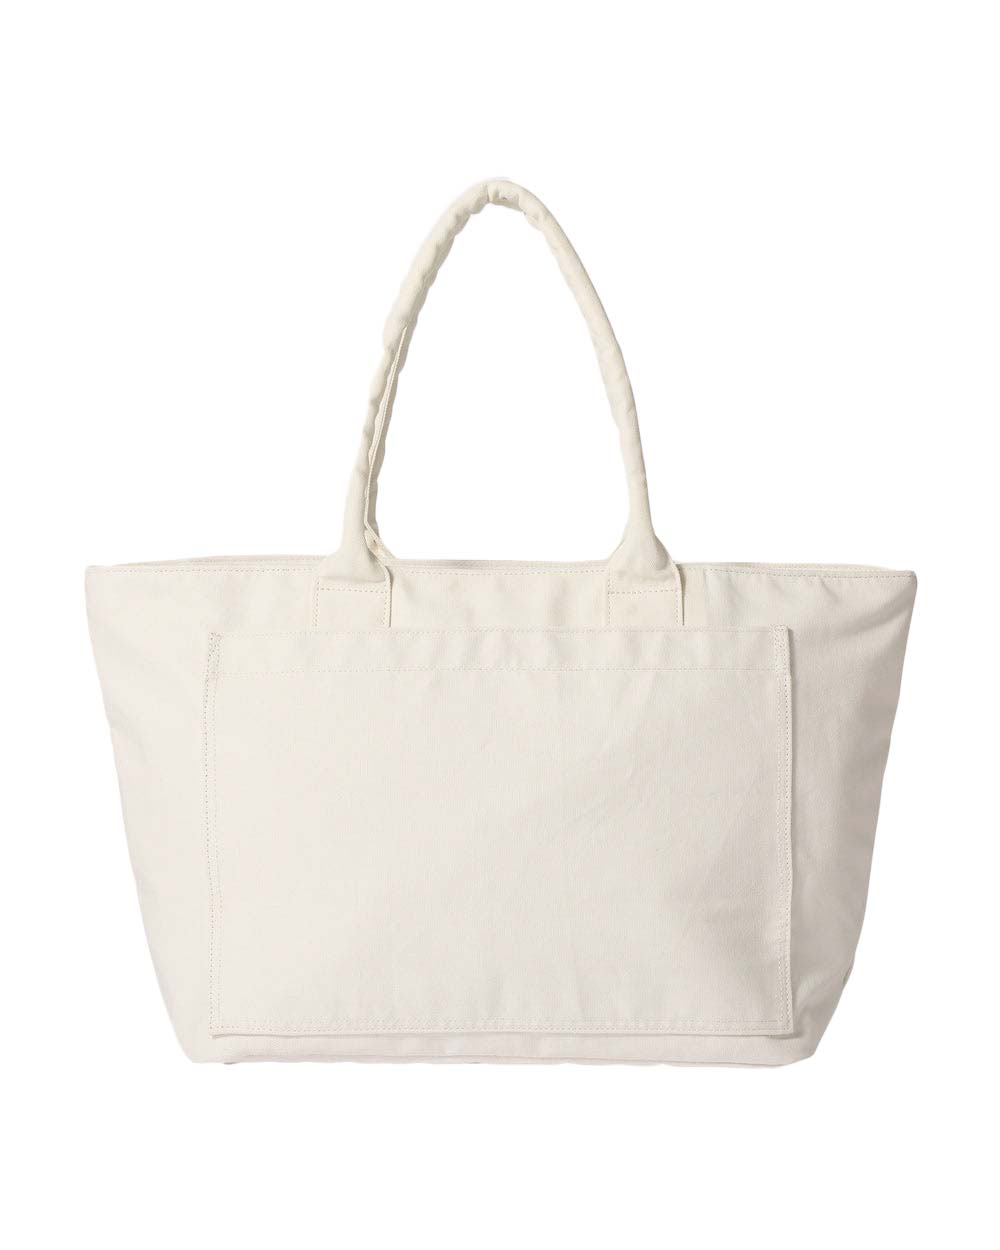 Carhartt WIP x RAMIDUS Tote Bag L WIP White in Cotton - US